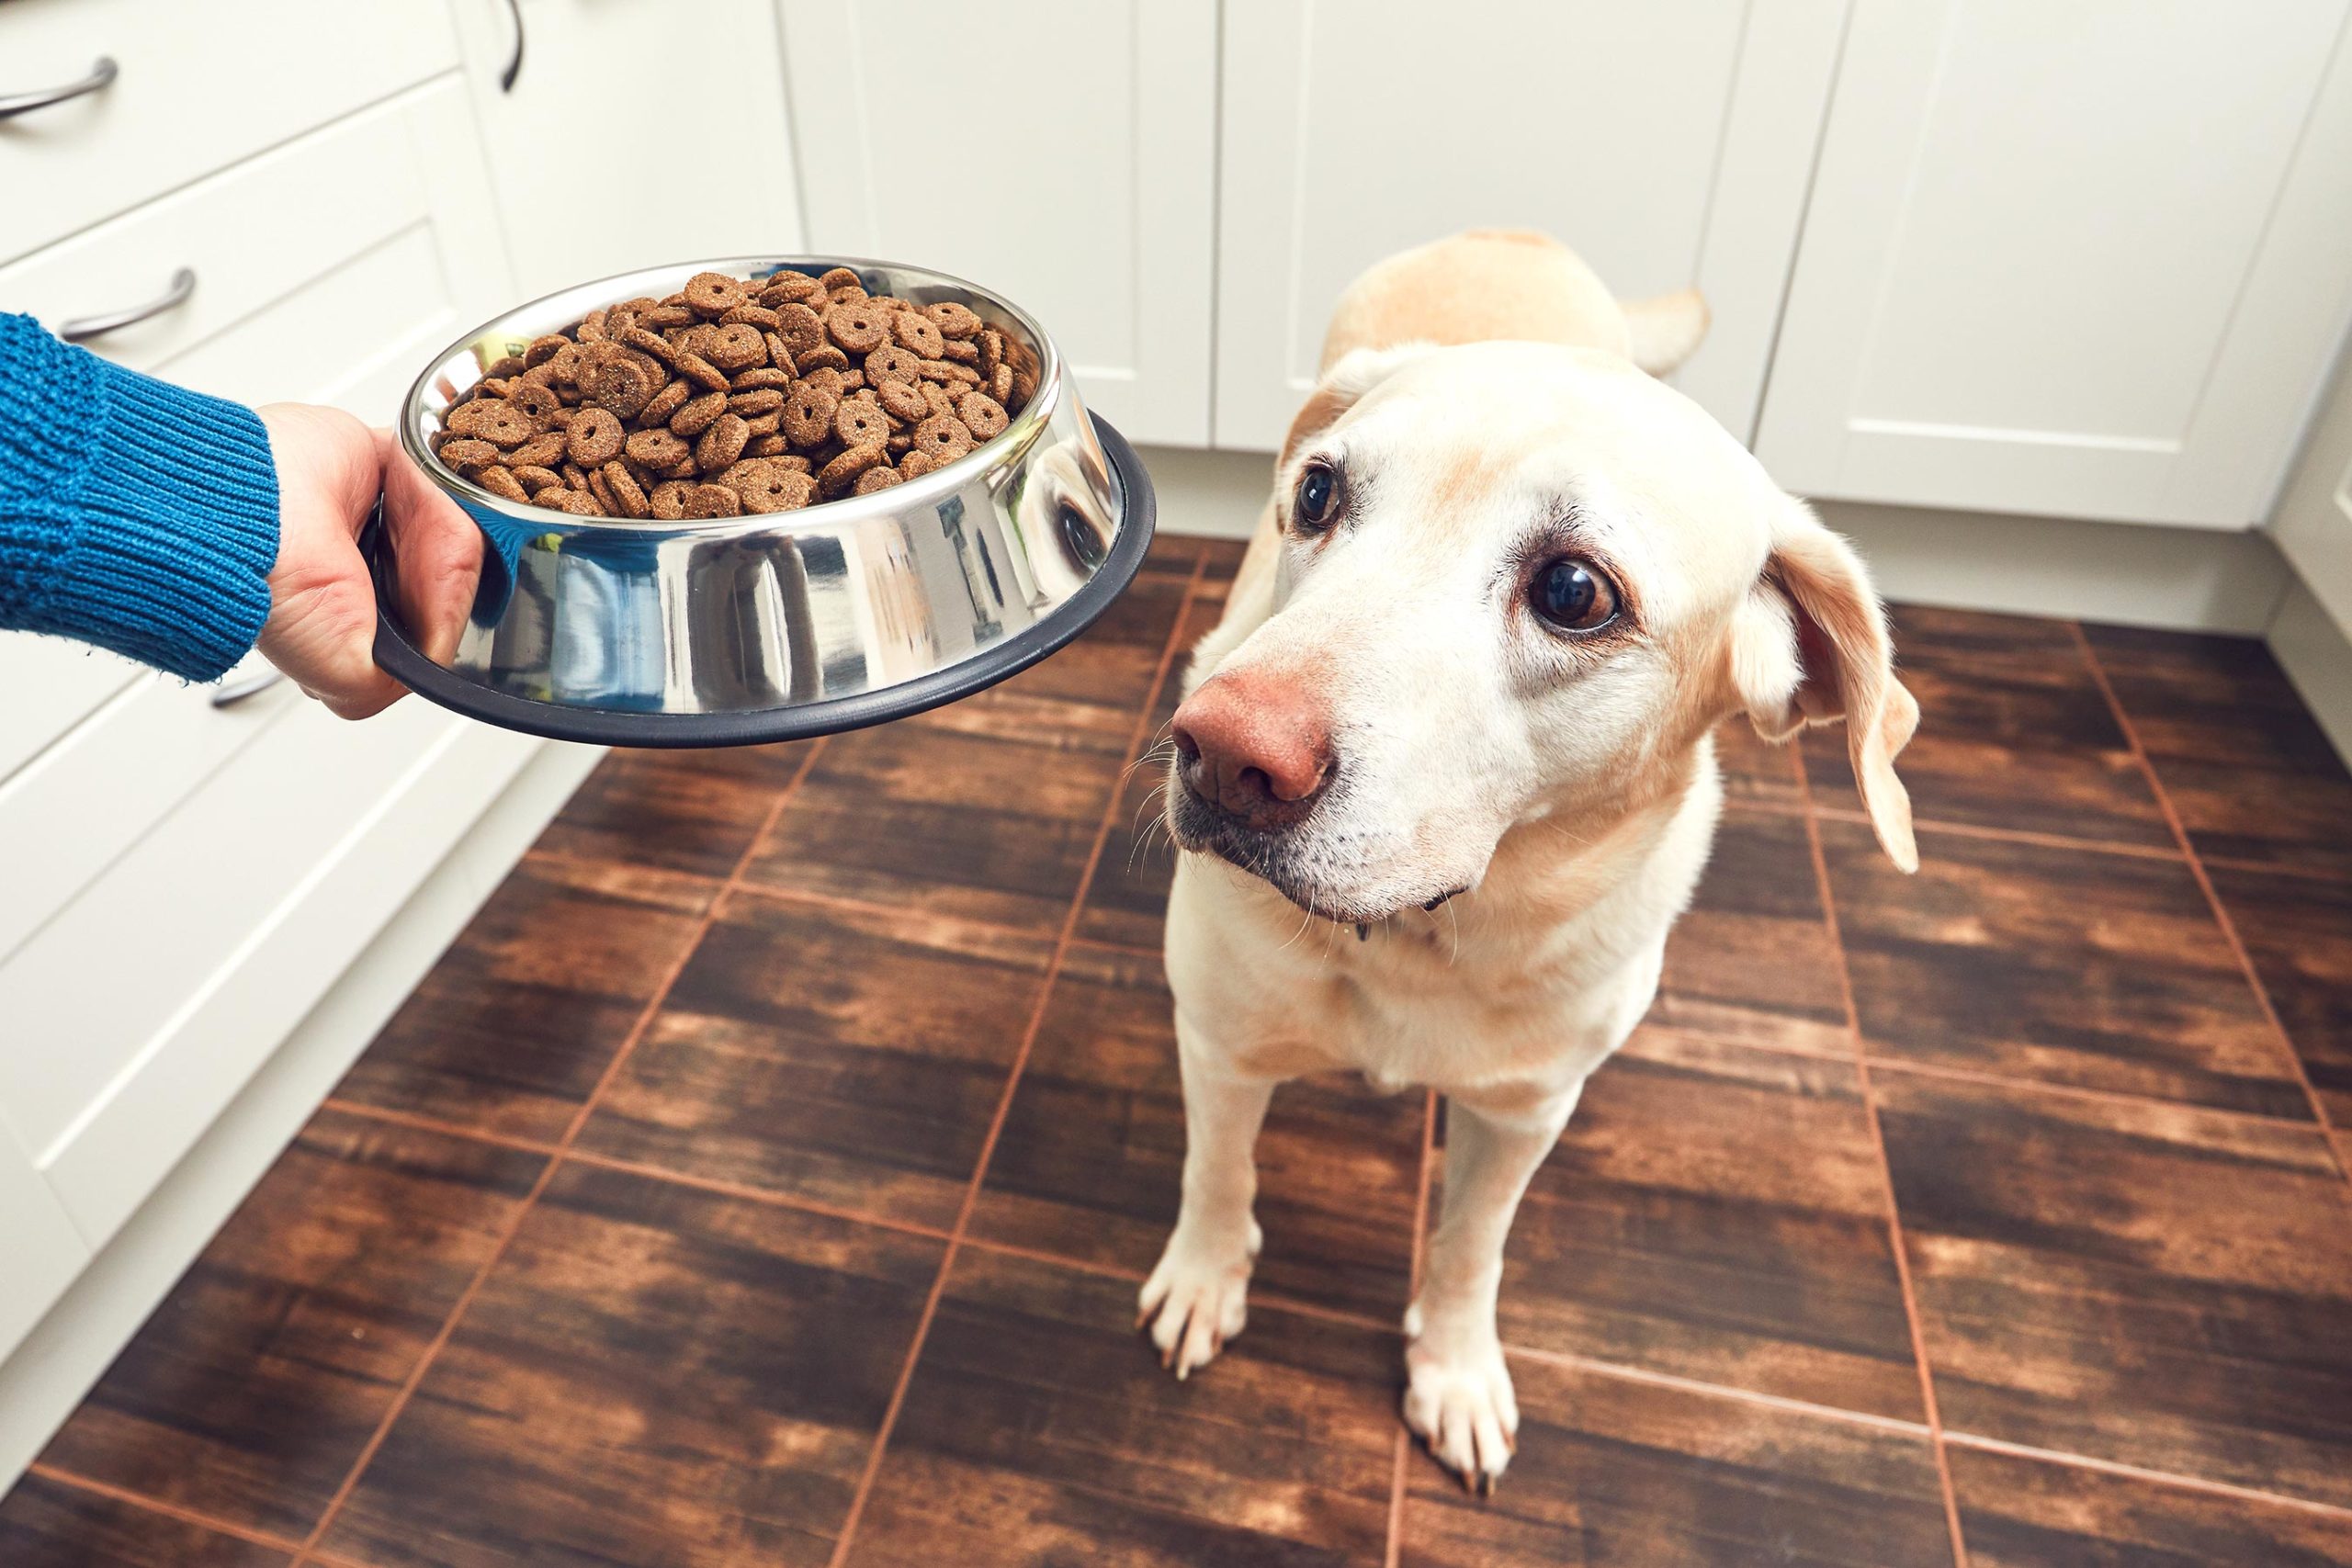 Grain free dog food killing dogs Here’s what pet owners